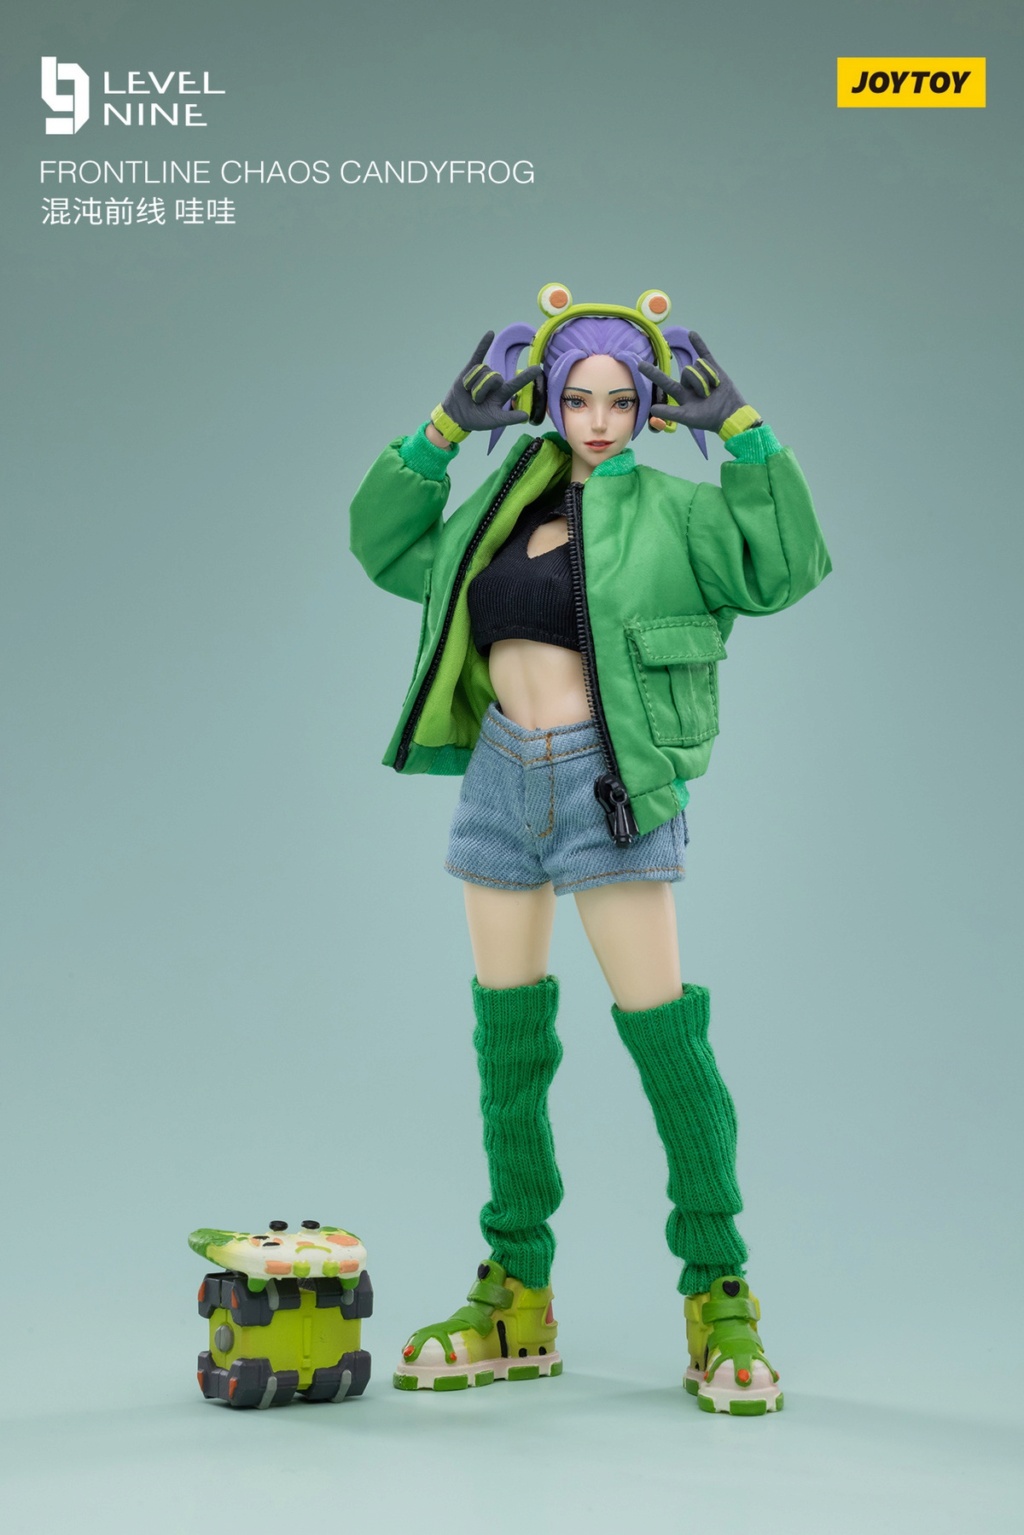 NEW PRODUCT: JOYTOY 1/12 FRONTLINE CHAOS CANDYFROG Chaos Frontline Wow 0471